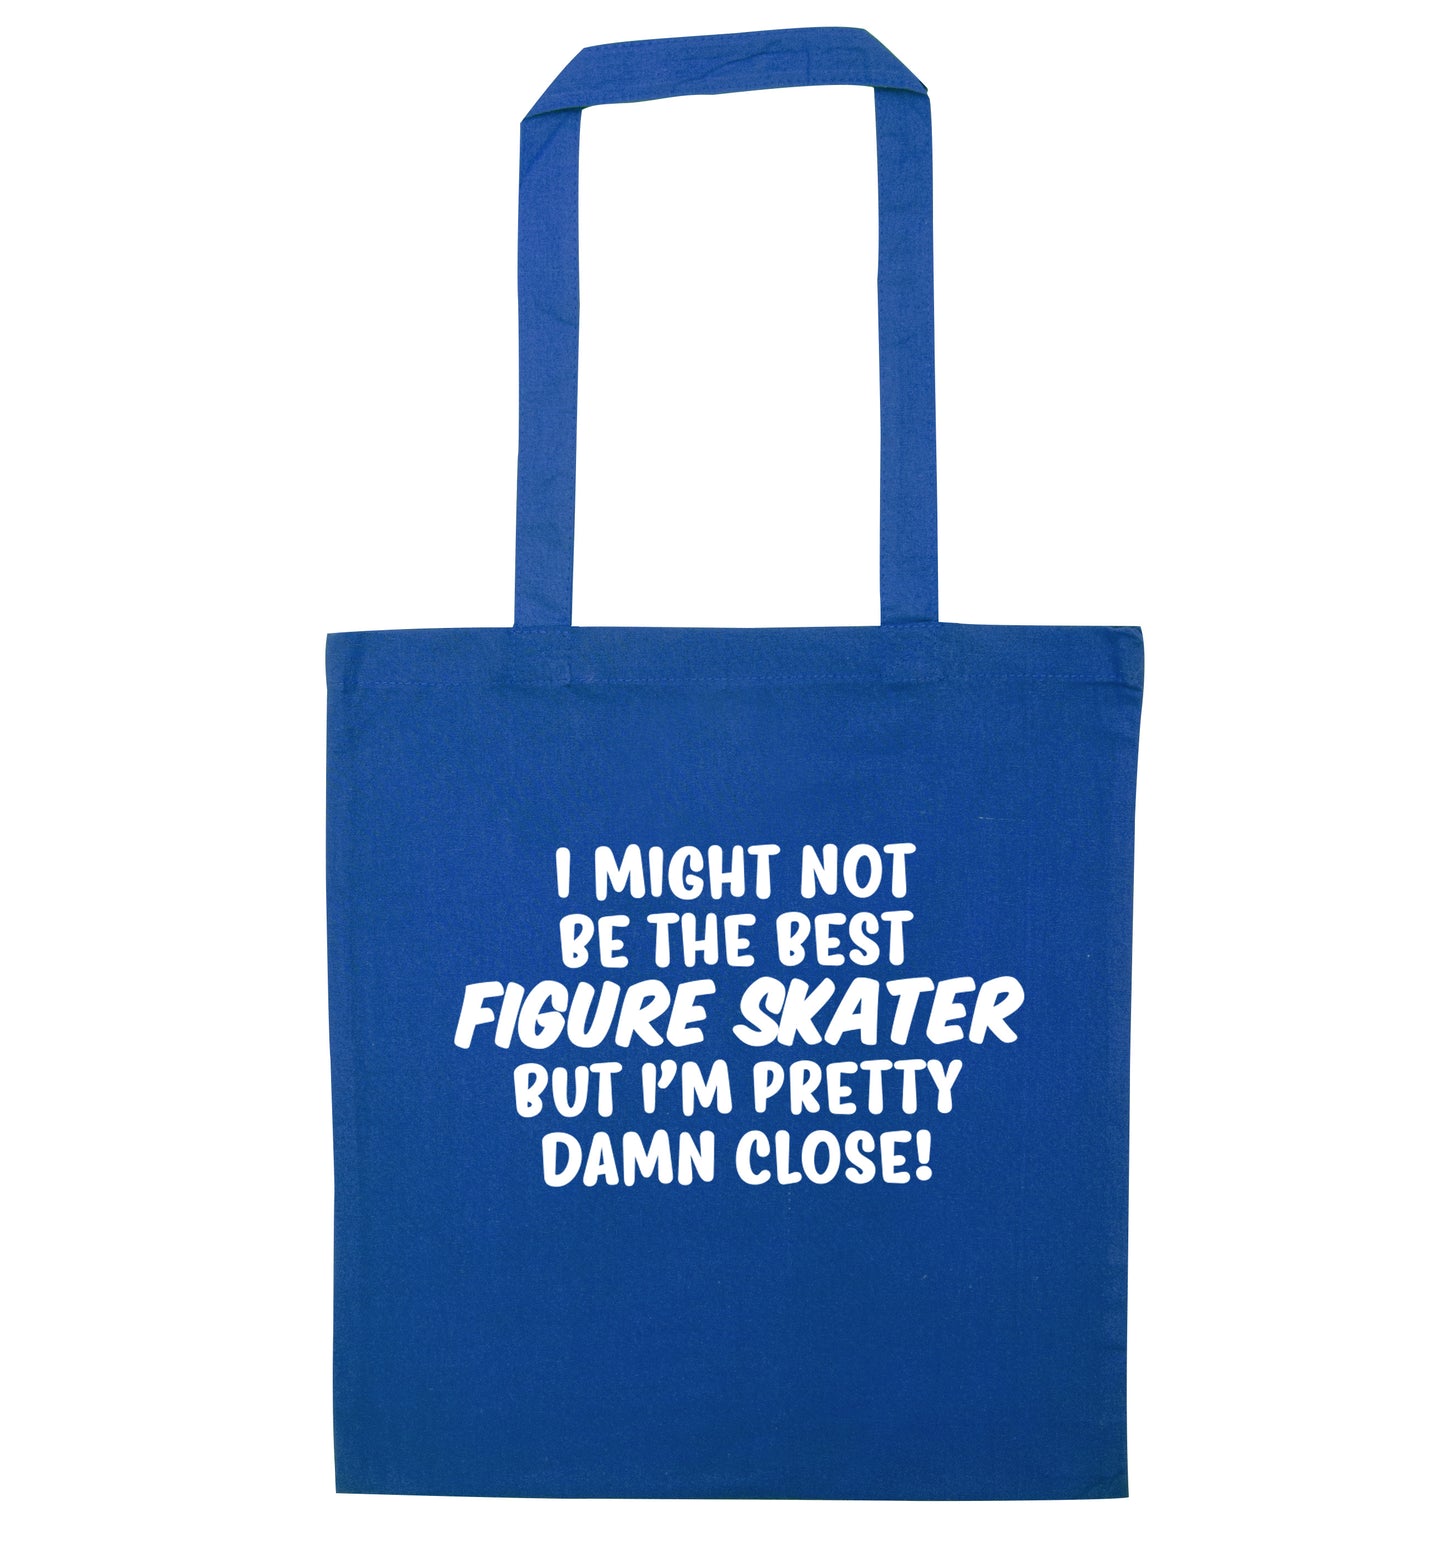 I might not be the best figure skater but I'm pretty damn close! blue tote bag